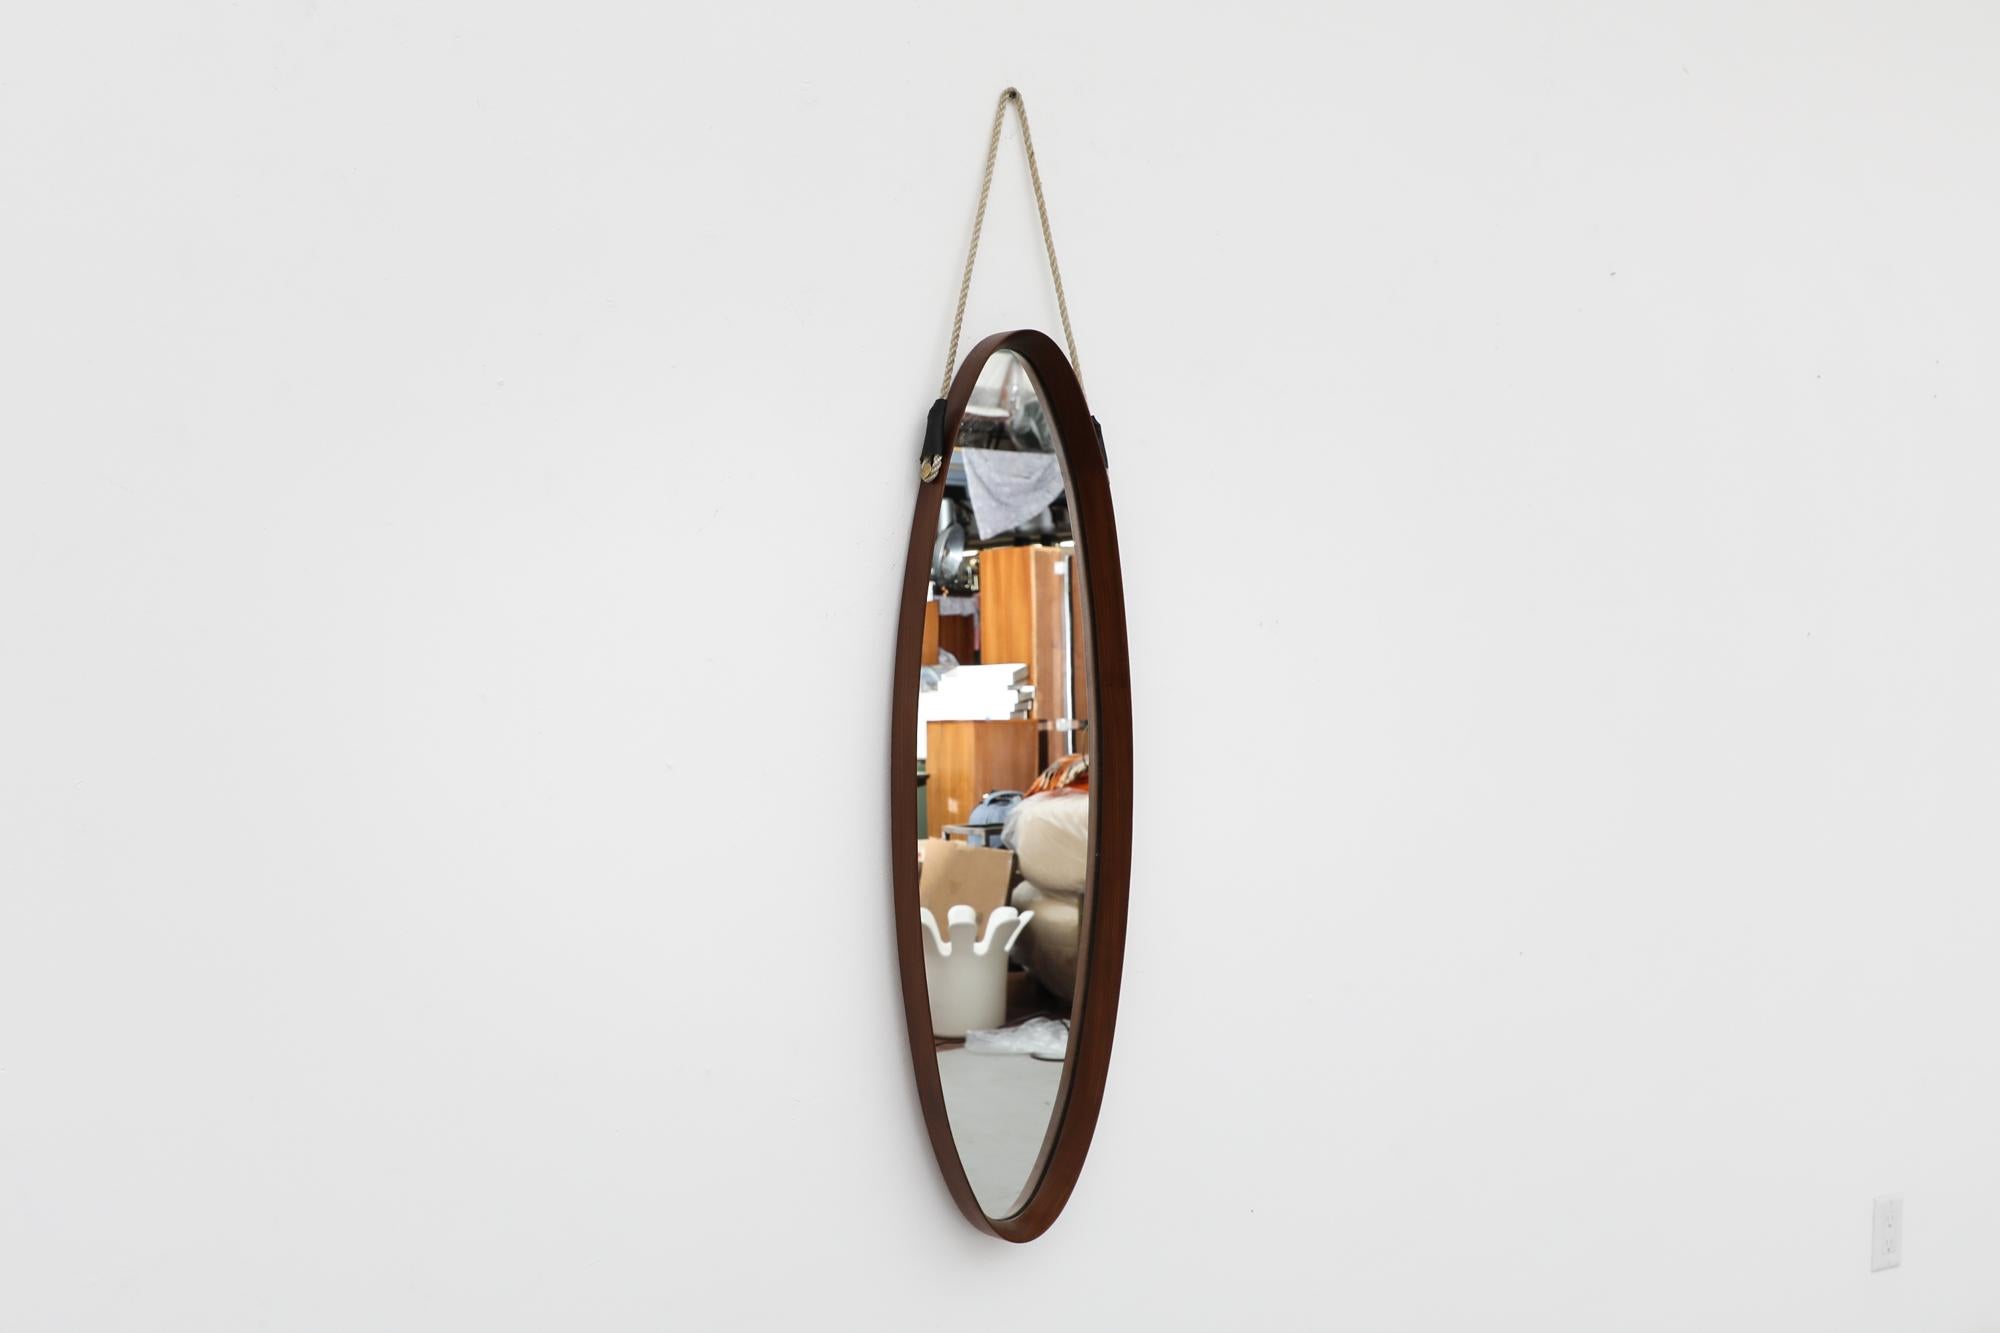 Mid-20th Century Italian Mid-Century Bent Teak Long Oval Mirror with Rope Strap For Sale